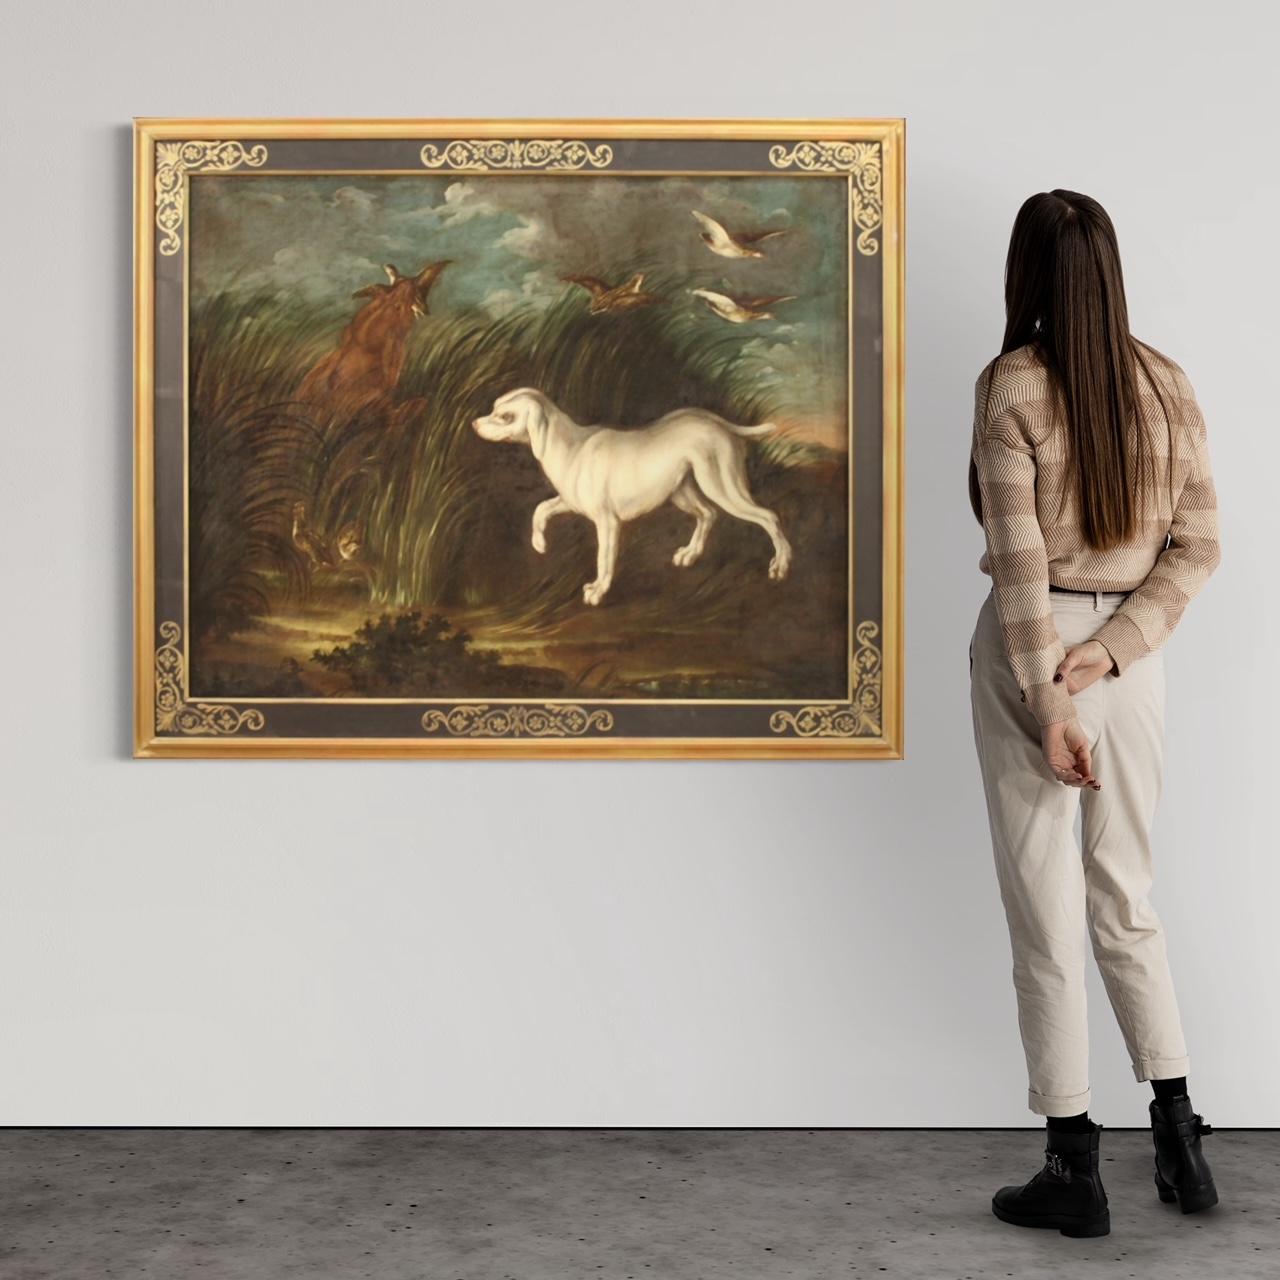 Antique French painting from 18th century. Oil on canvas framework depicting landscape with hunting dogs with partridges of good pictorial quality. Painting of great measure and impact, for antique dealers, interior decorators and collectors of